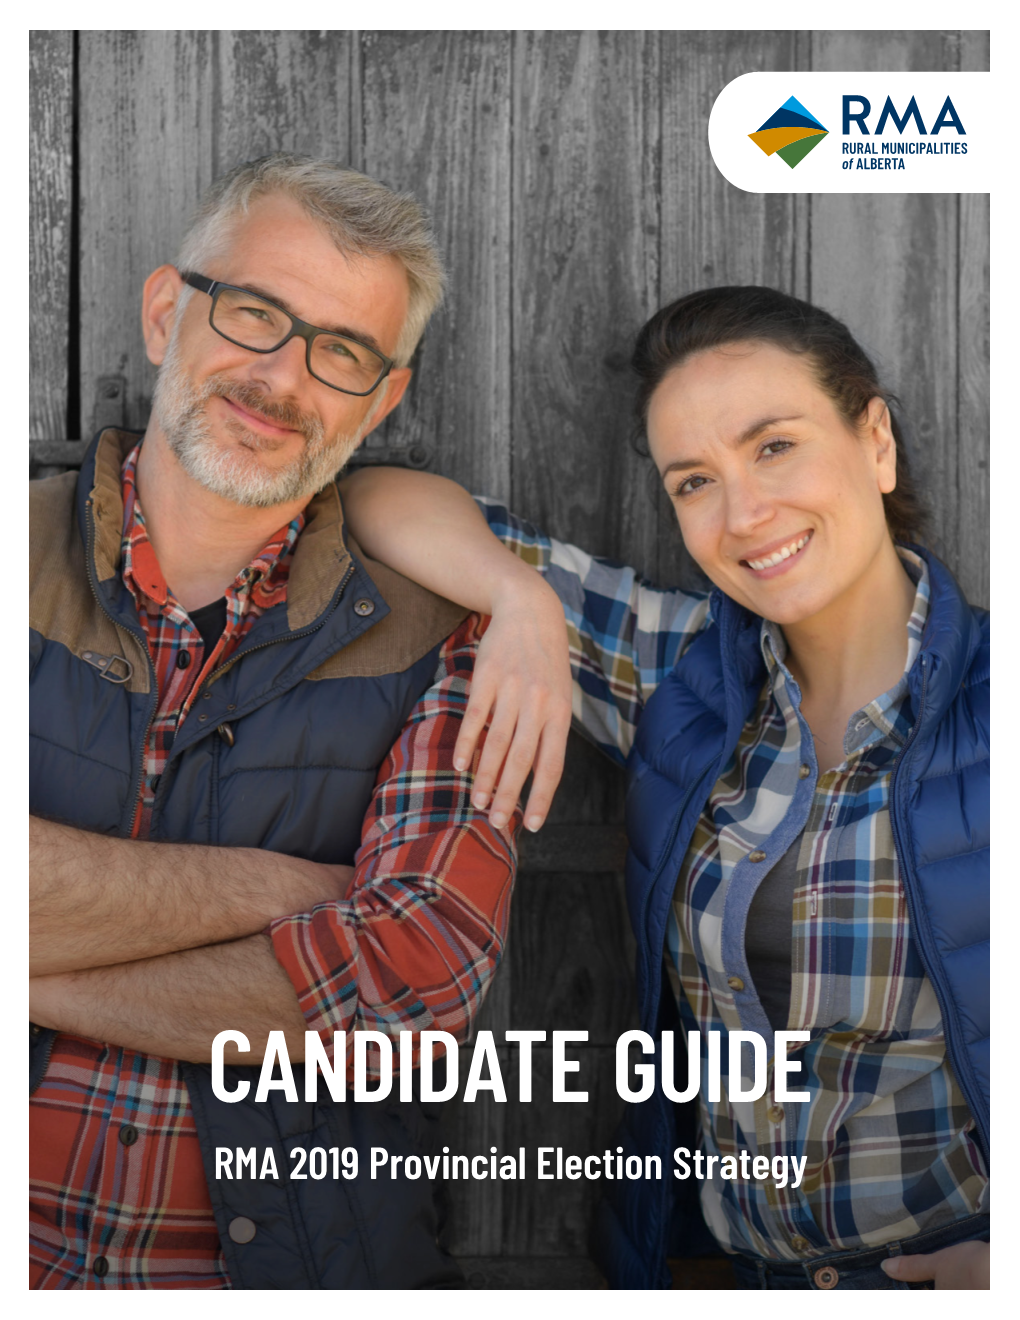 CANDIDATE GUIDE RMA 2019 Provincial Election Strategy the RMA – an OVERVIEW